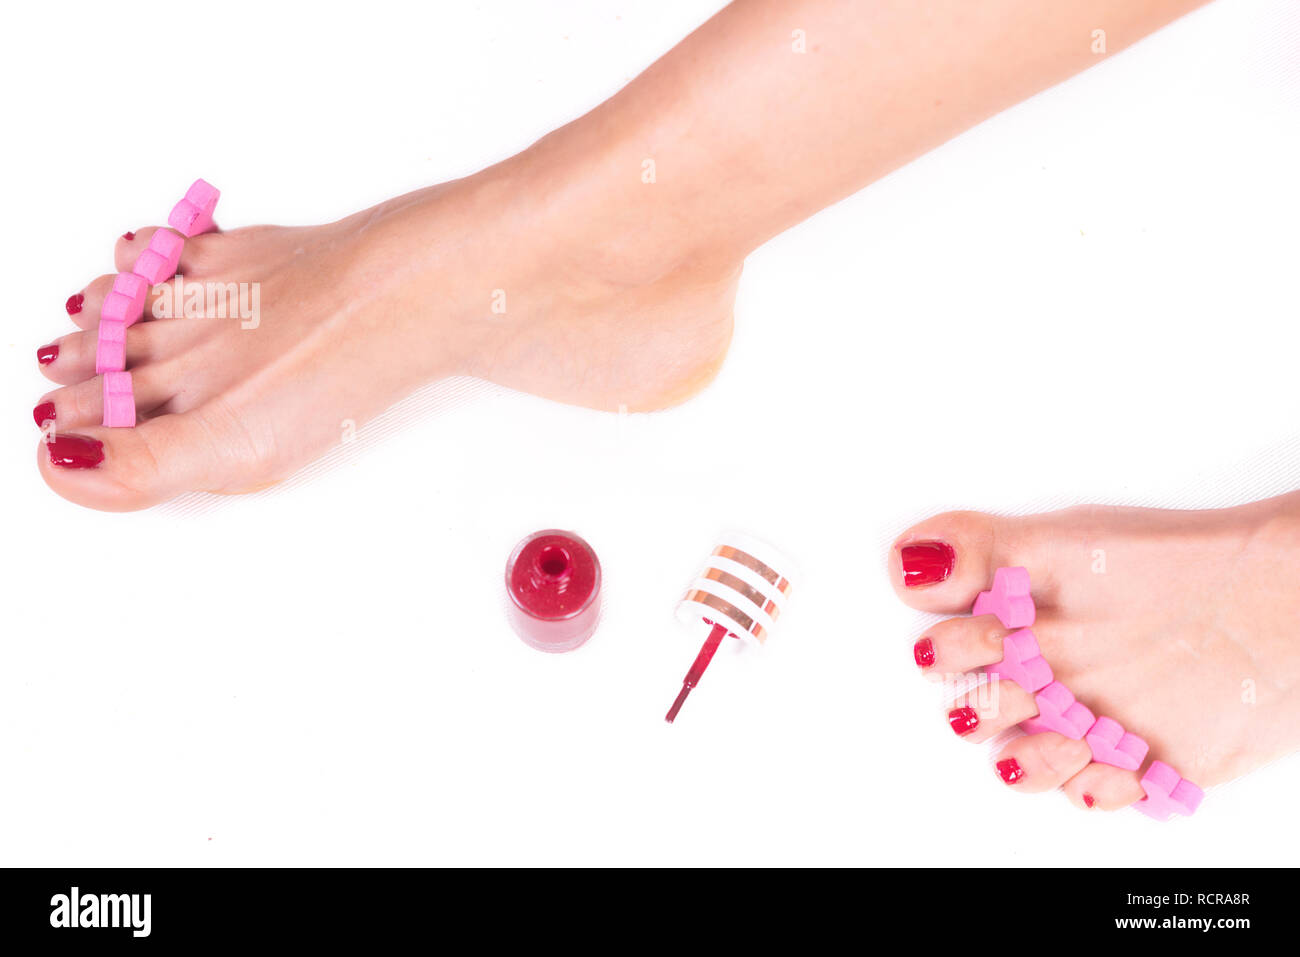 applying pedicure to woman's feet with red toenails, in pink toe separators, on white isolated background . Stock Photo